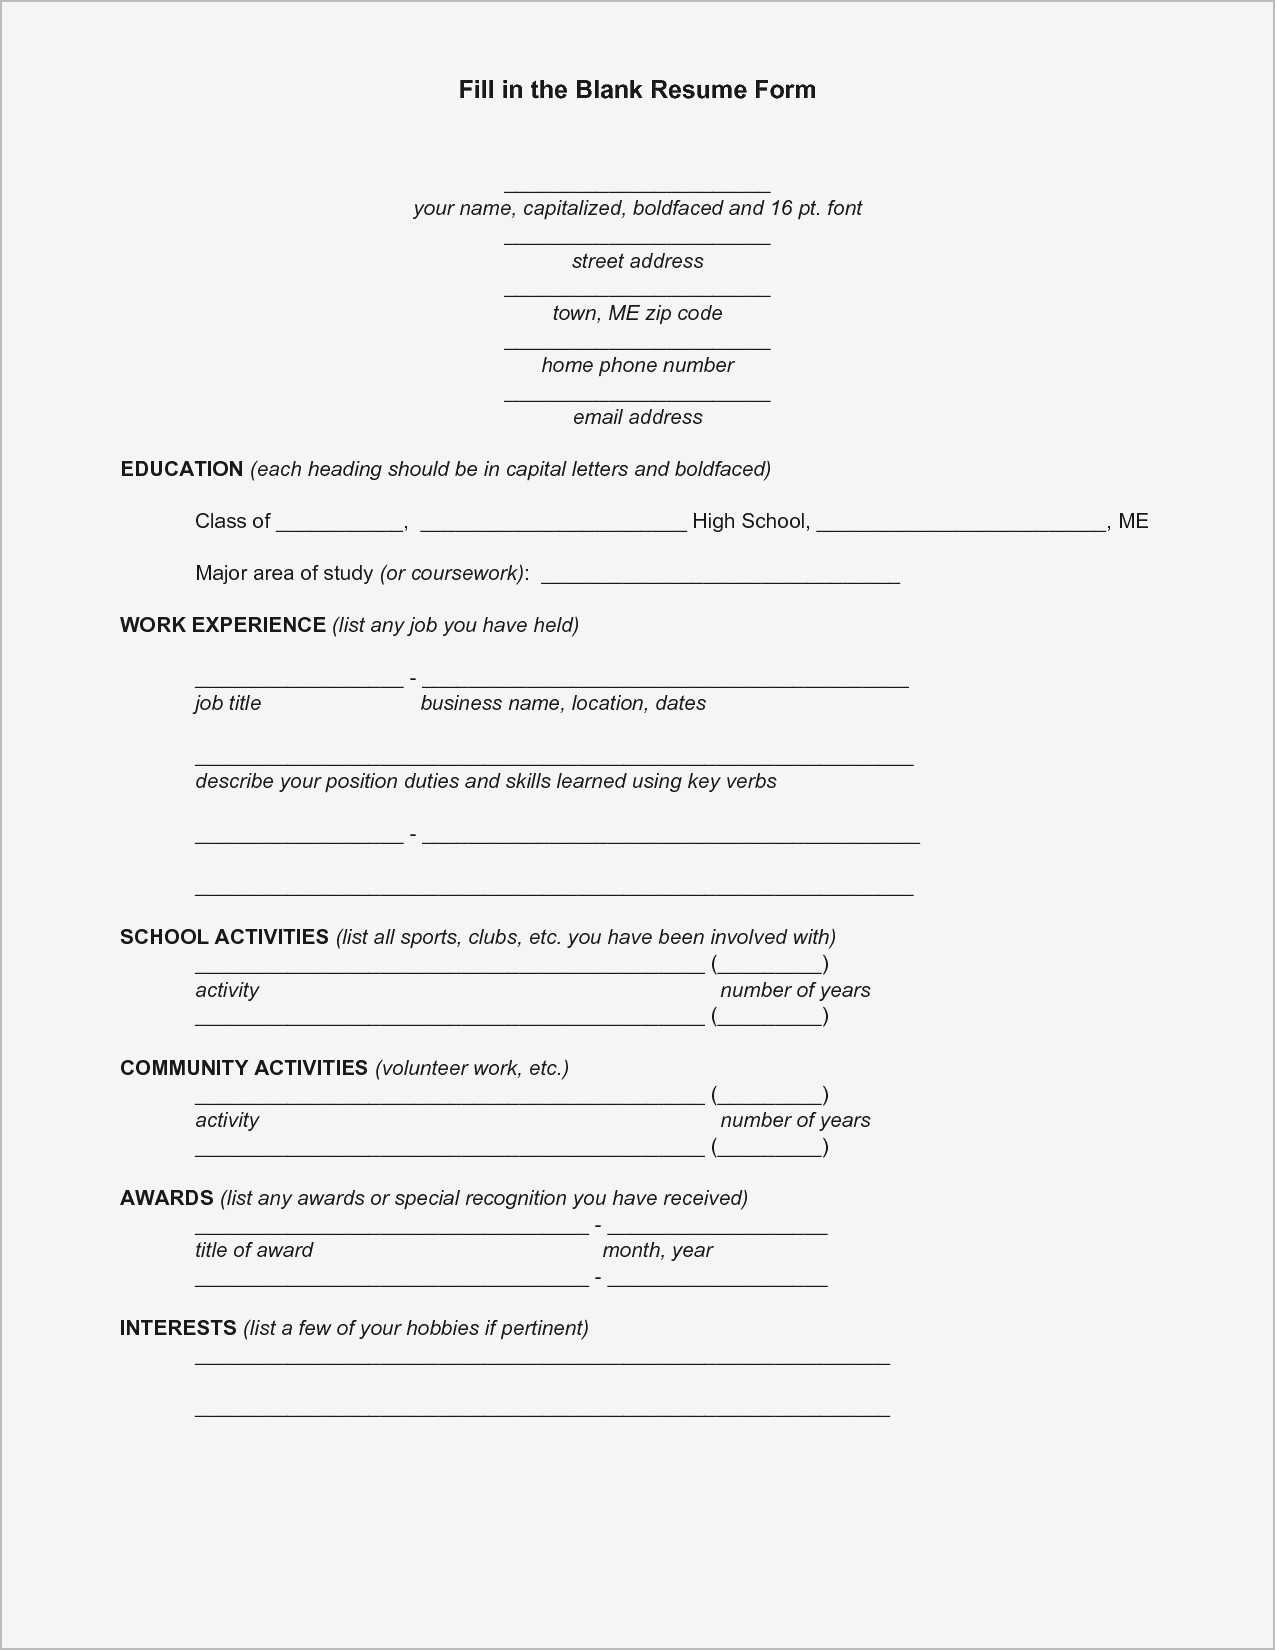 Fill In the Blank Resume Worksheet Also Fill In Resume Template Samples